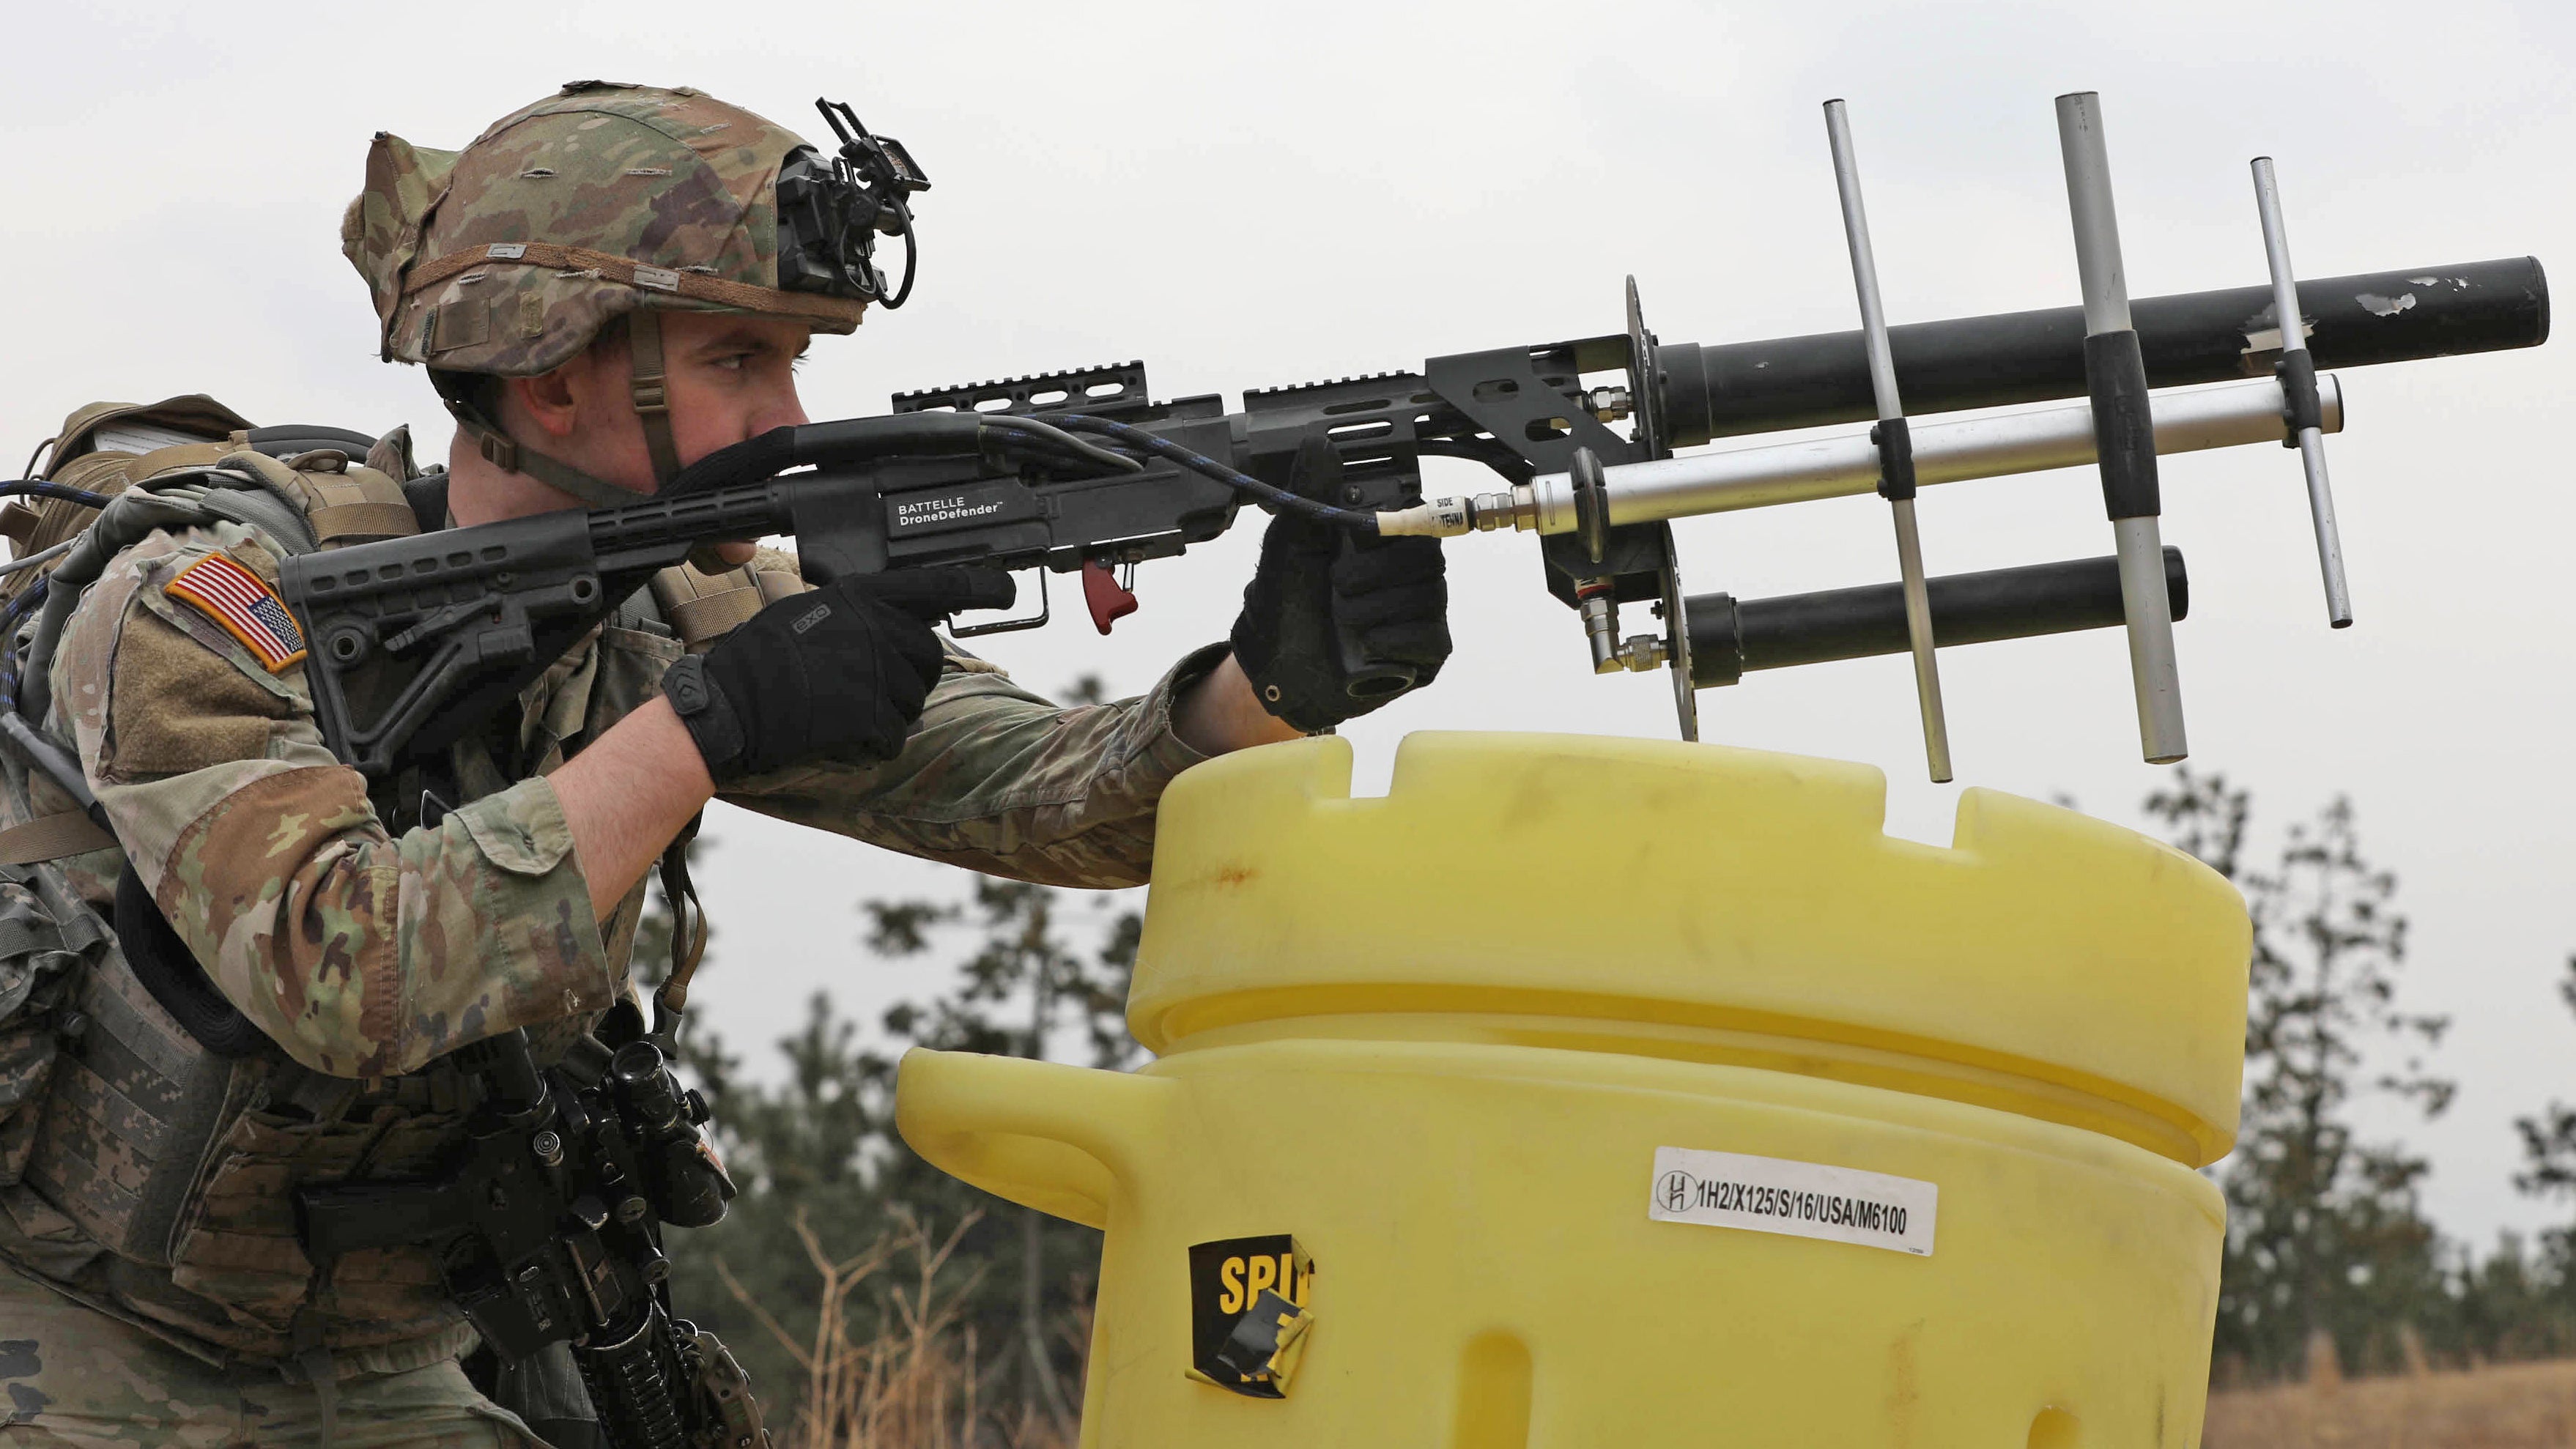 A soldier trains on a counter-drone weapon.